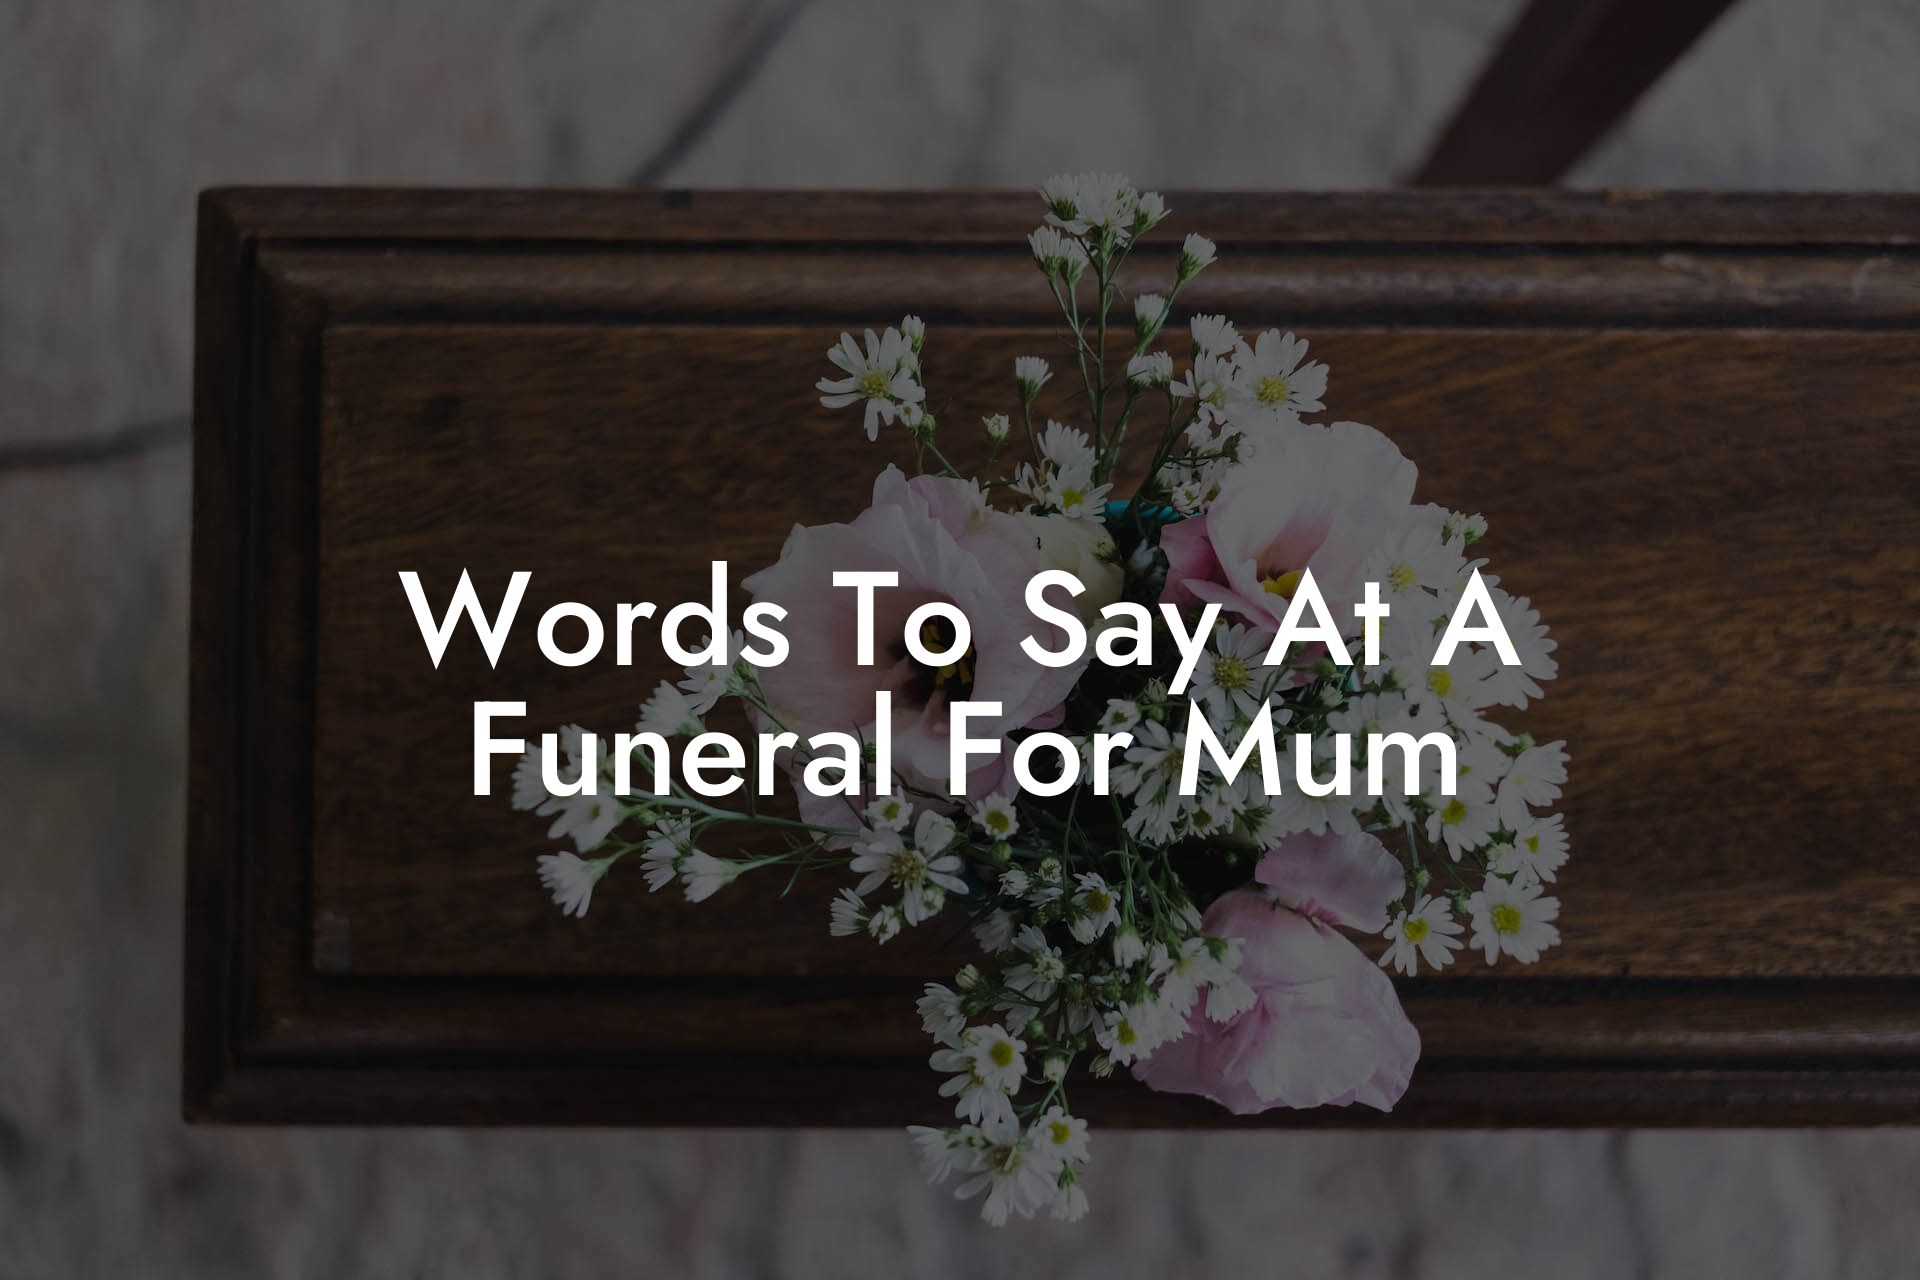 Words To Say At A Funeral For Mum